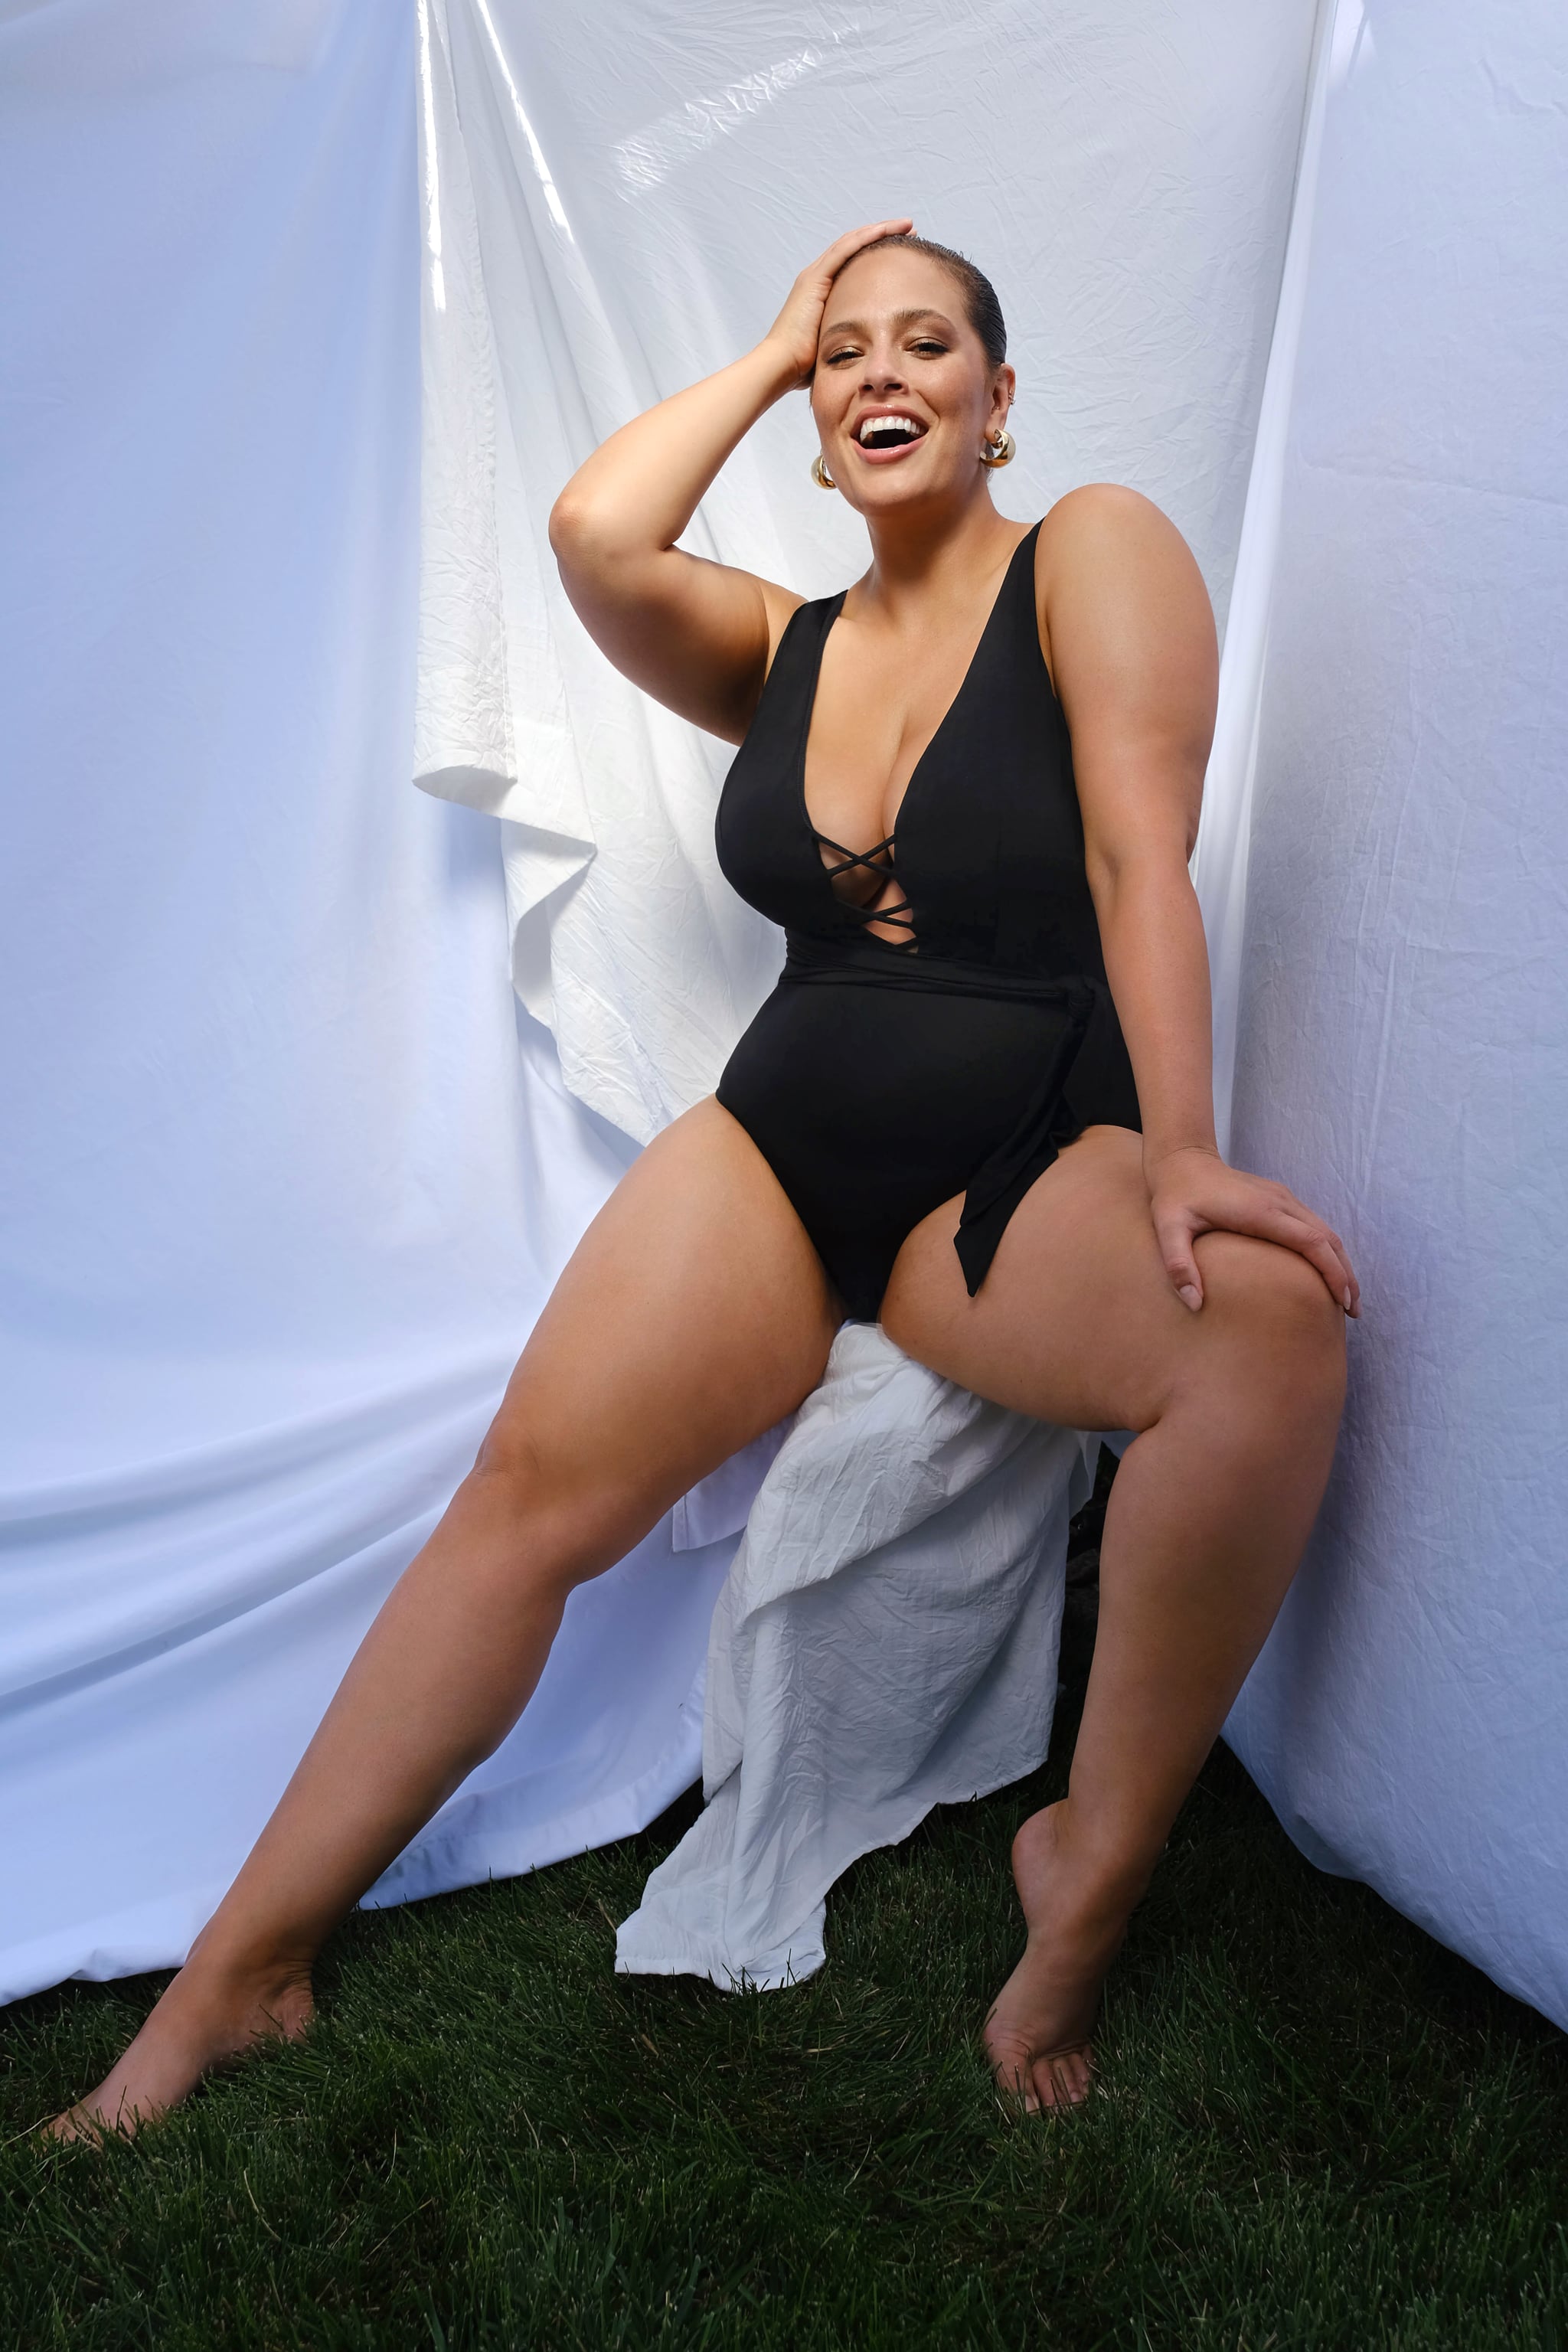 Shop Ashley Graham's Bikinis From Her At-Home Photo Shoot